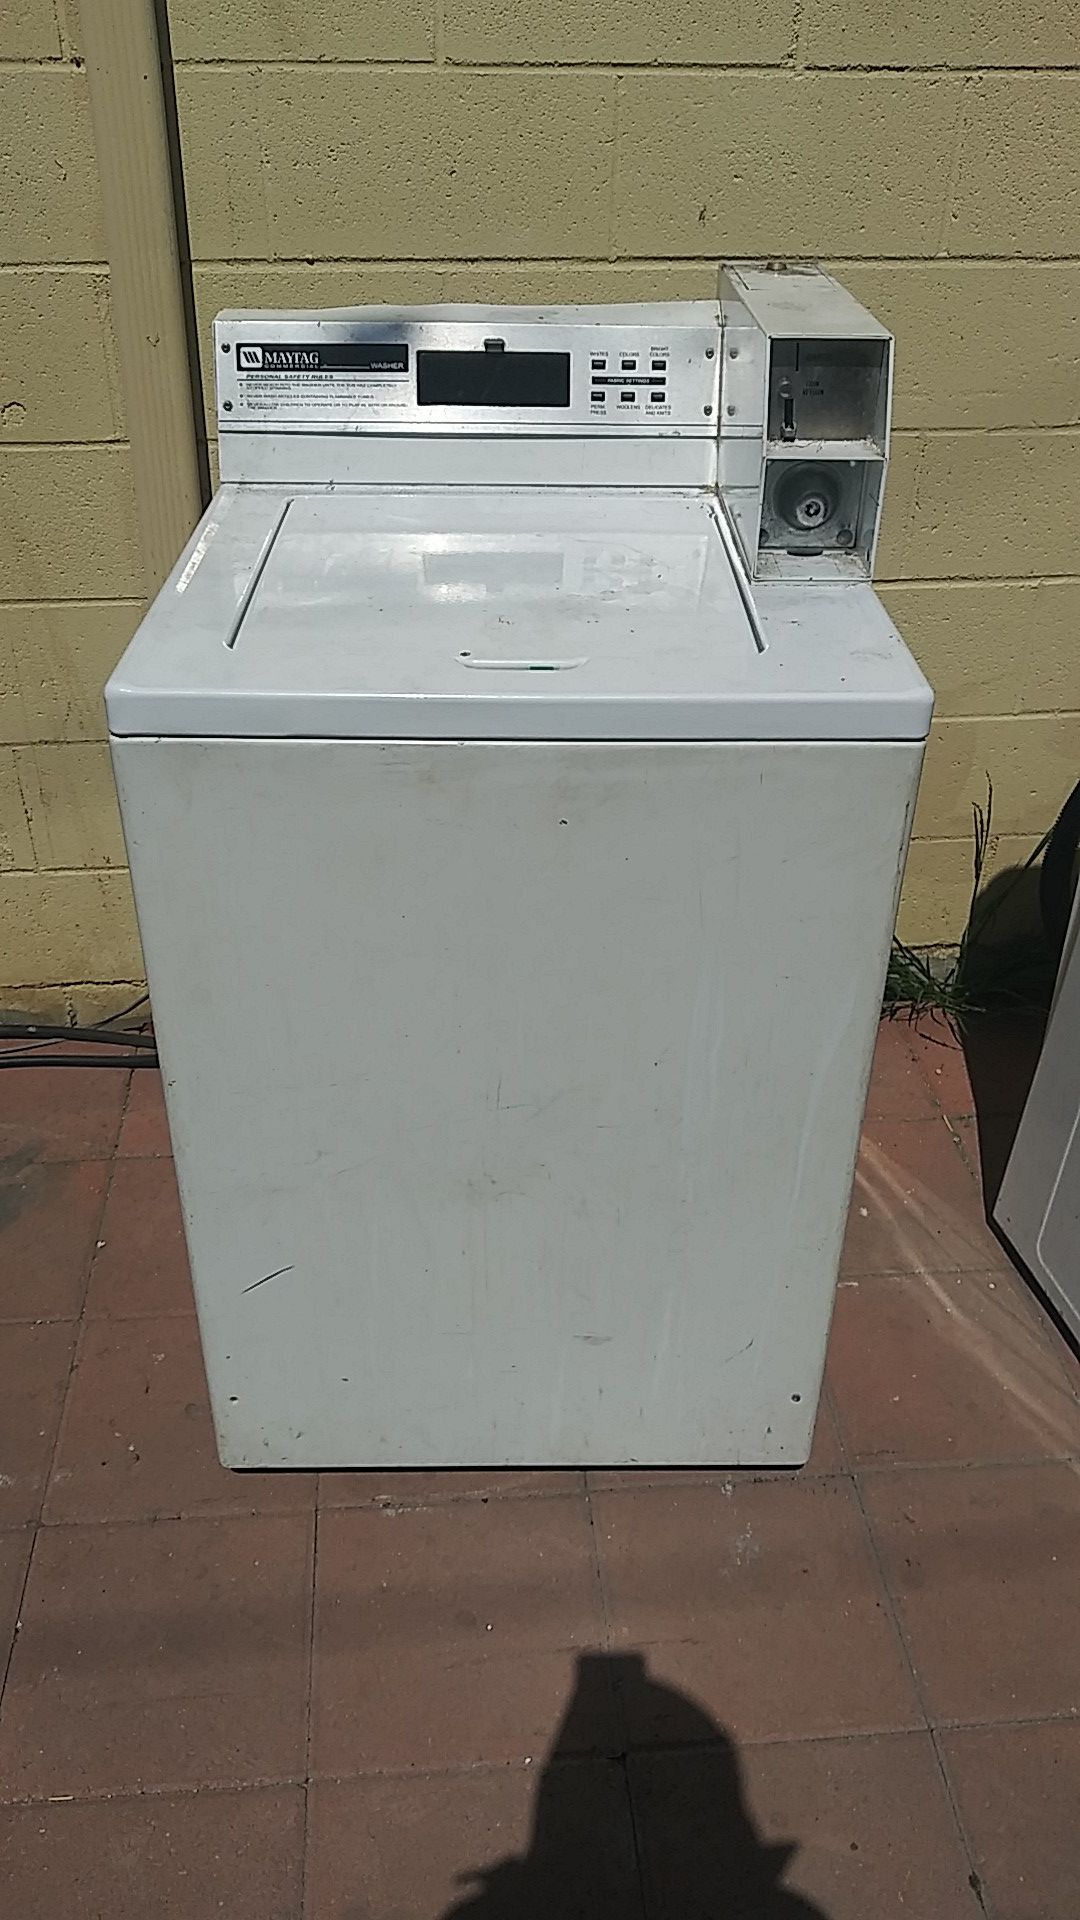 Maytag commercial coin operated washer